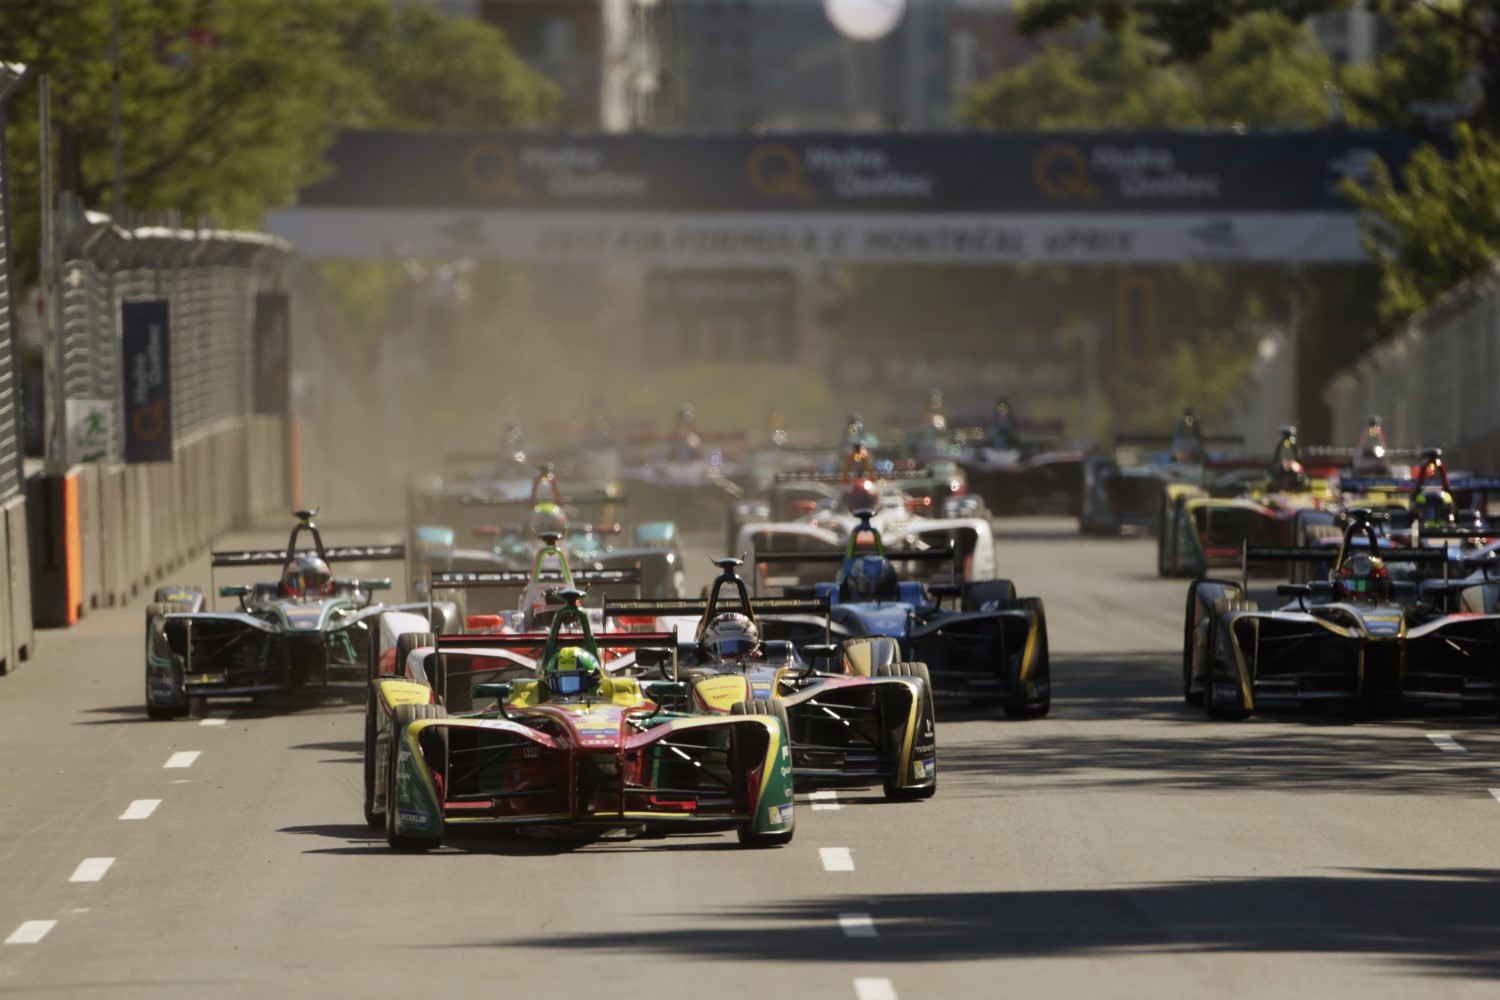 Race after race after race fails due to low ticket sales. Fans have almost zero interest in watching silent race cars. If electric race cars are the future, motorsports has no future.